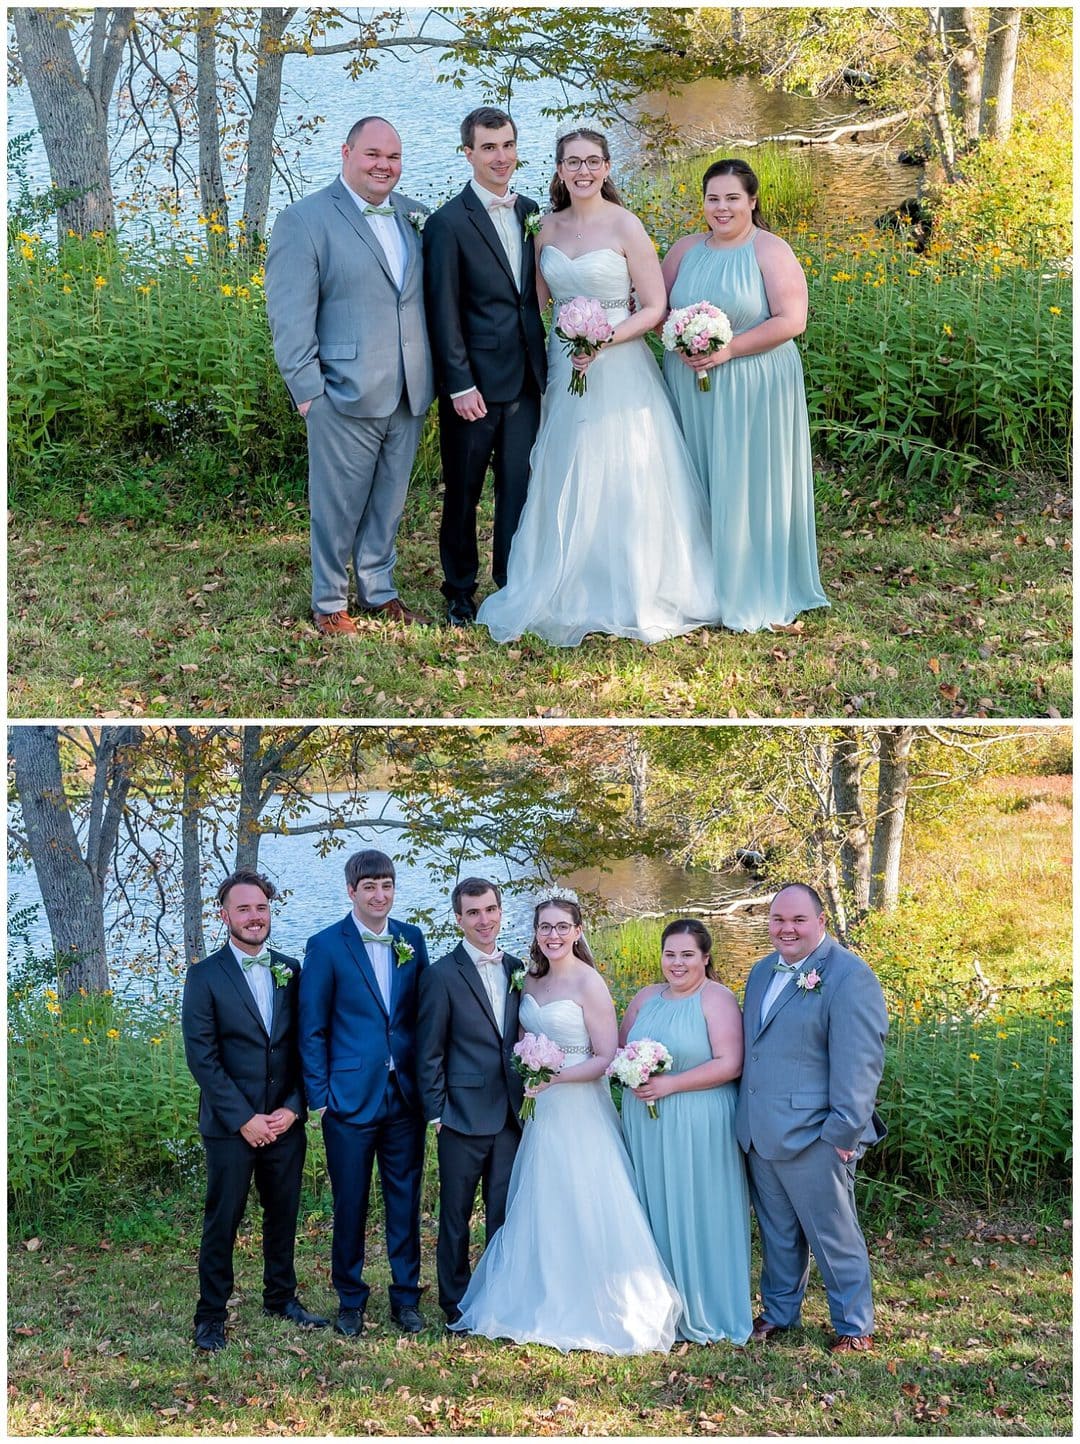 The bride and groom pose with their wedding party during their wedding at the Kinley Farm in Lunenburg NS.